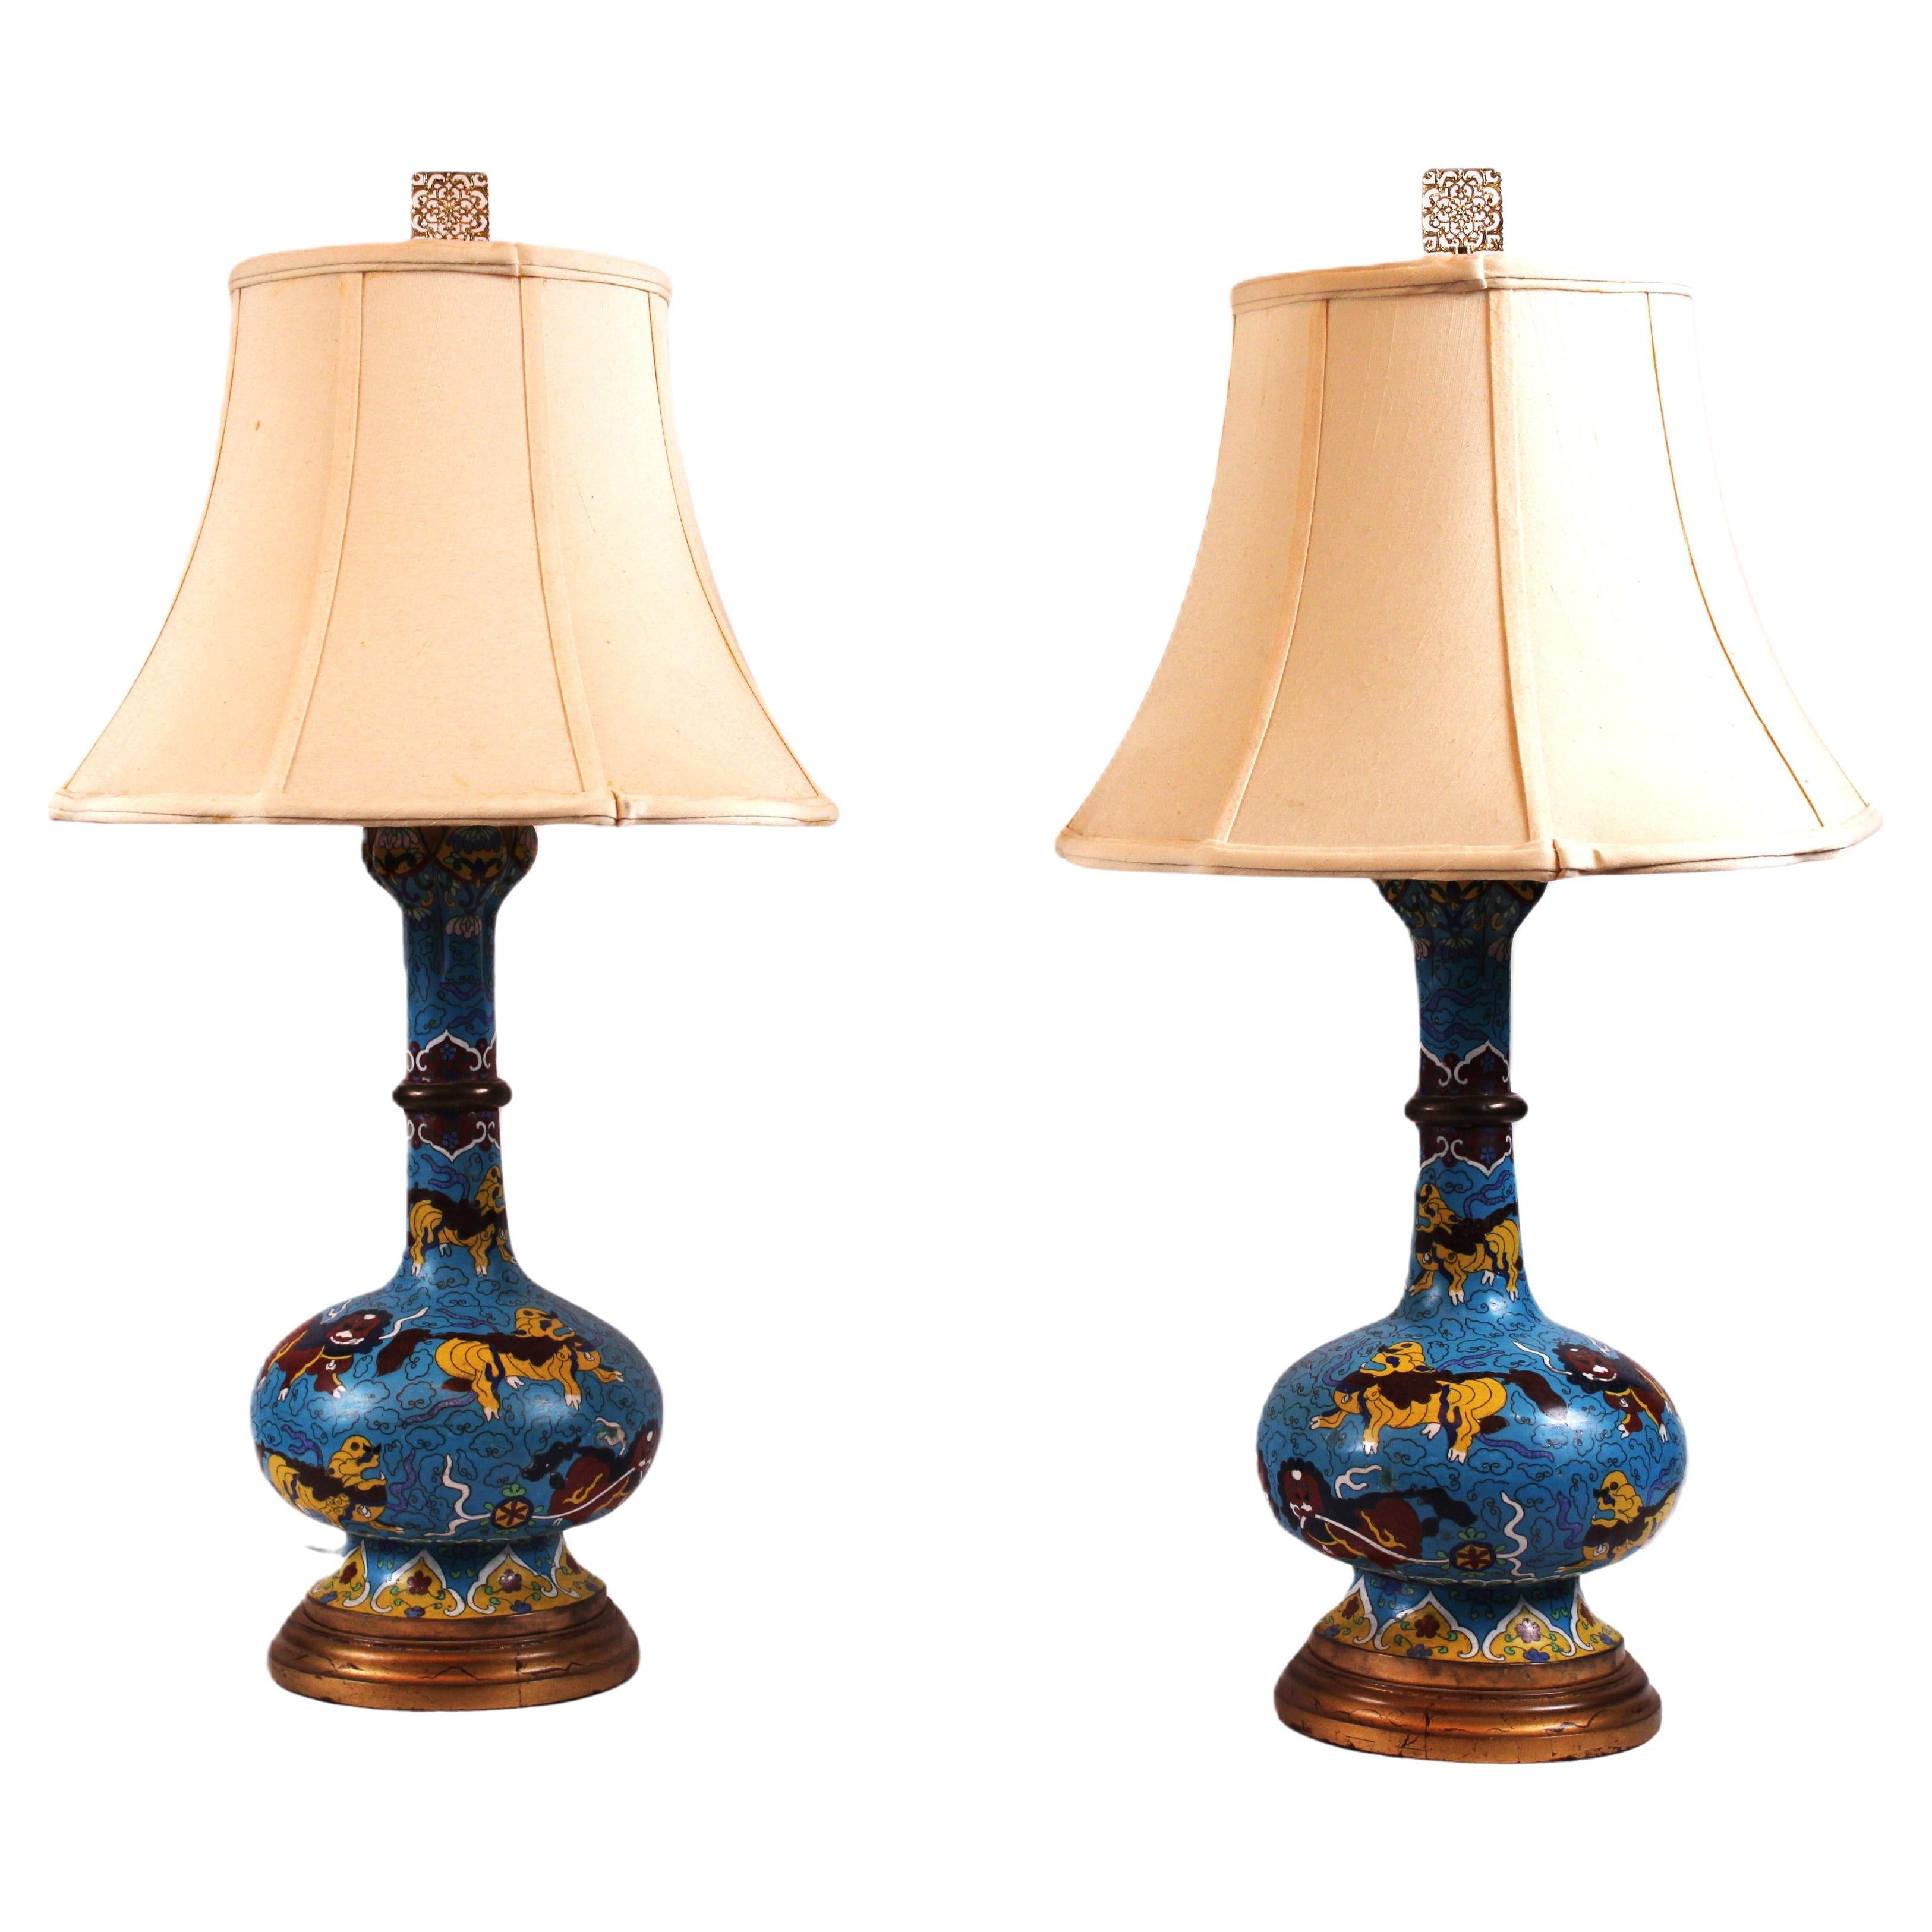 Harmony in Enamel and Silk: Pair of Cloisonne' Lamps with Silk Lampshades For Sale